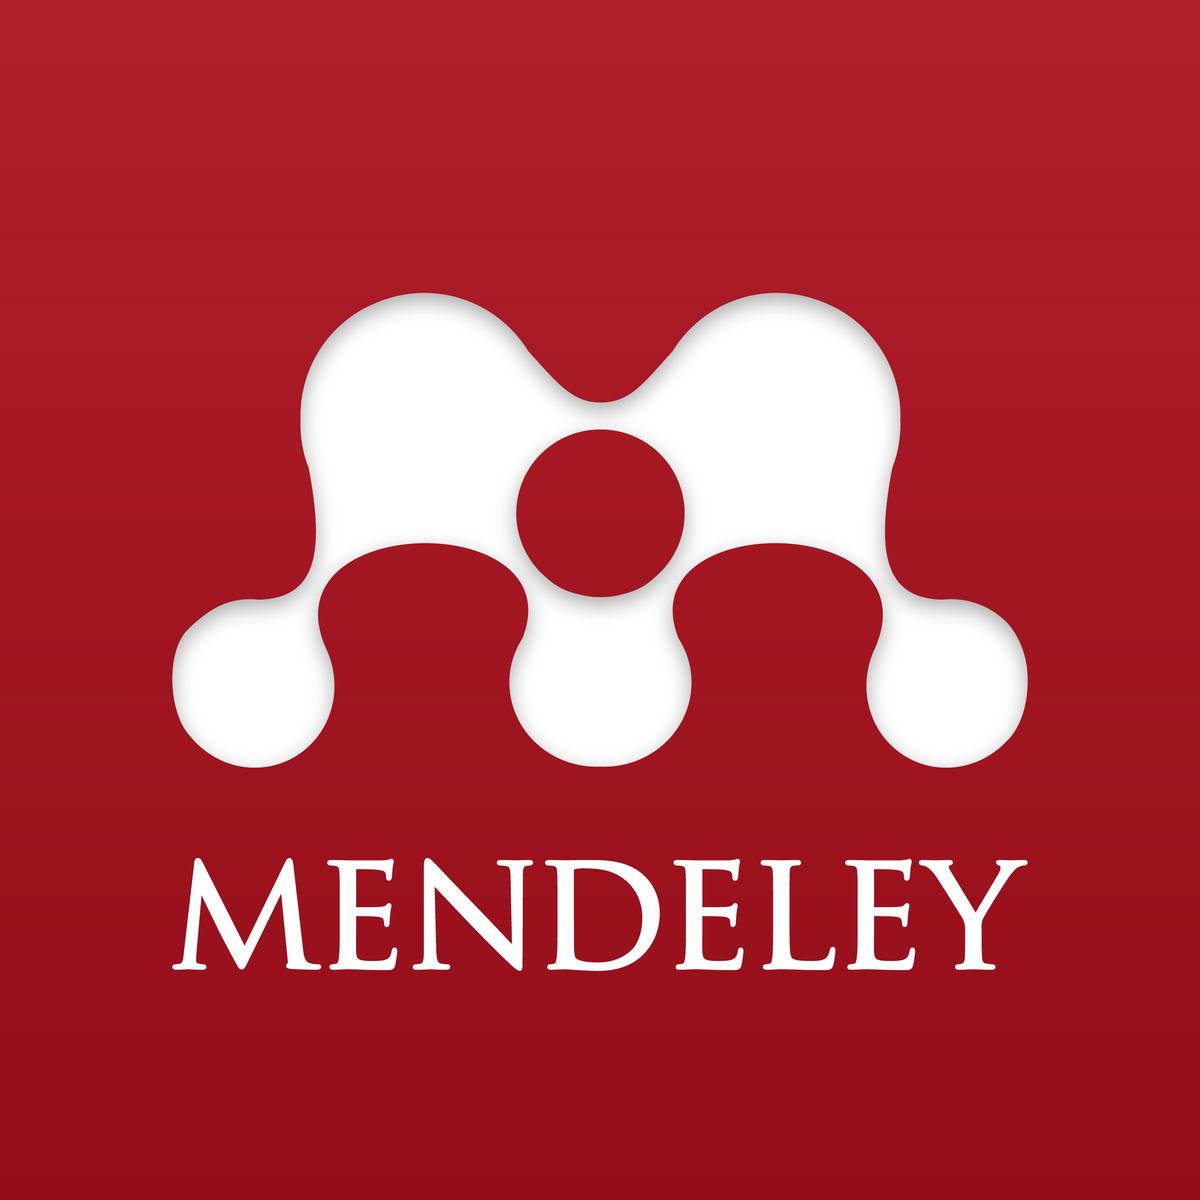 https://rclibrary.rosarycollege.org/wp-content/uploads/2022/01/Mendeley.png